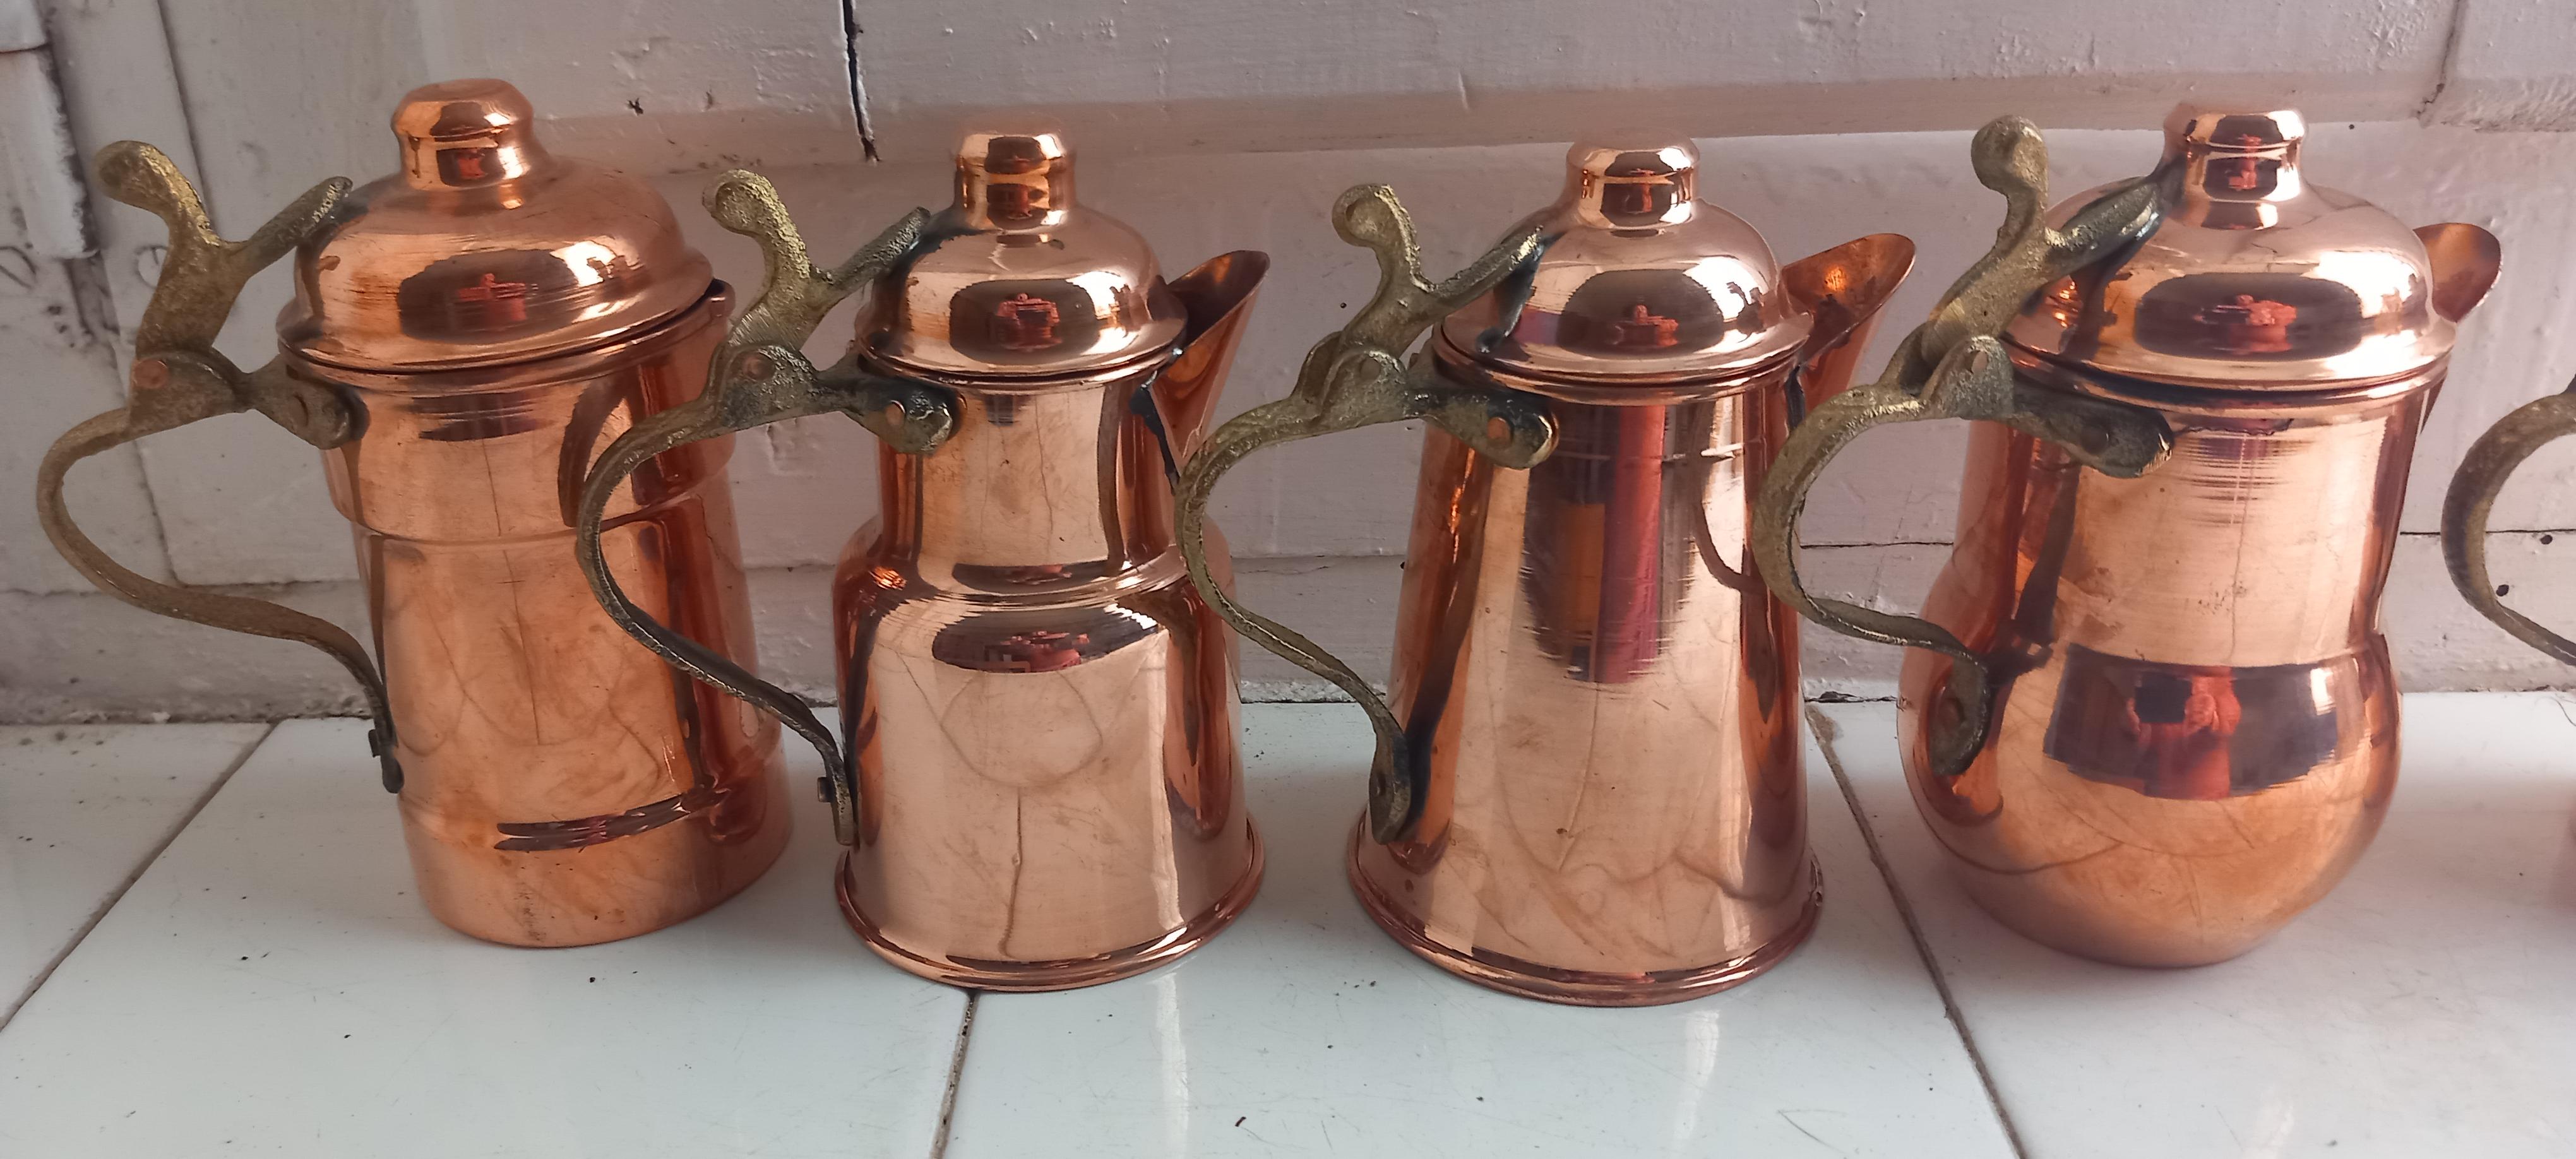  Copper Kitchen Decoration Vintage Coffee Pots Lot of 5 Diferent Design In Excellent Condition For Sale In Mombuey, Zamora